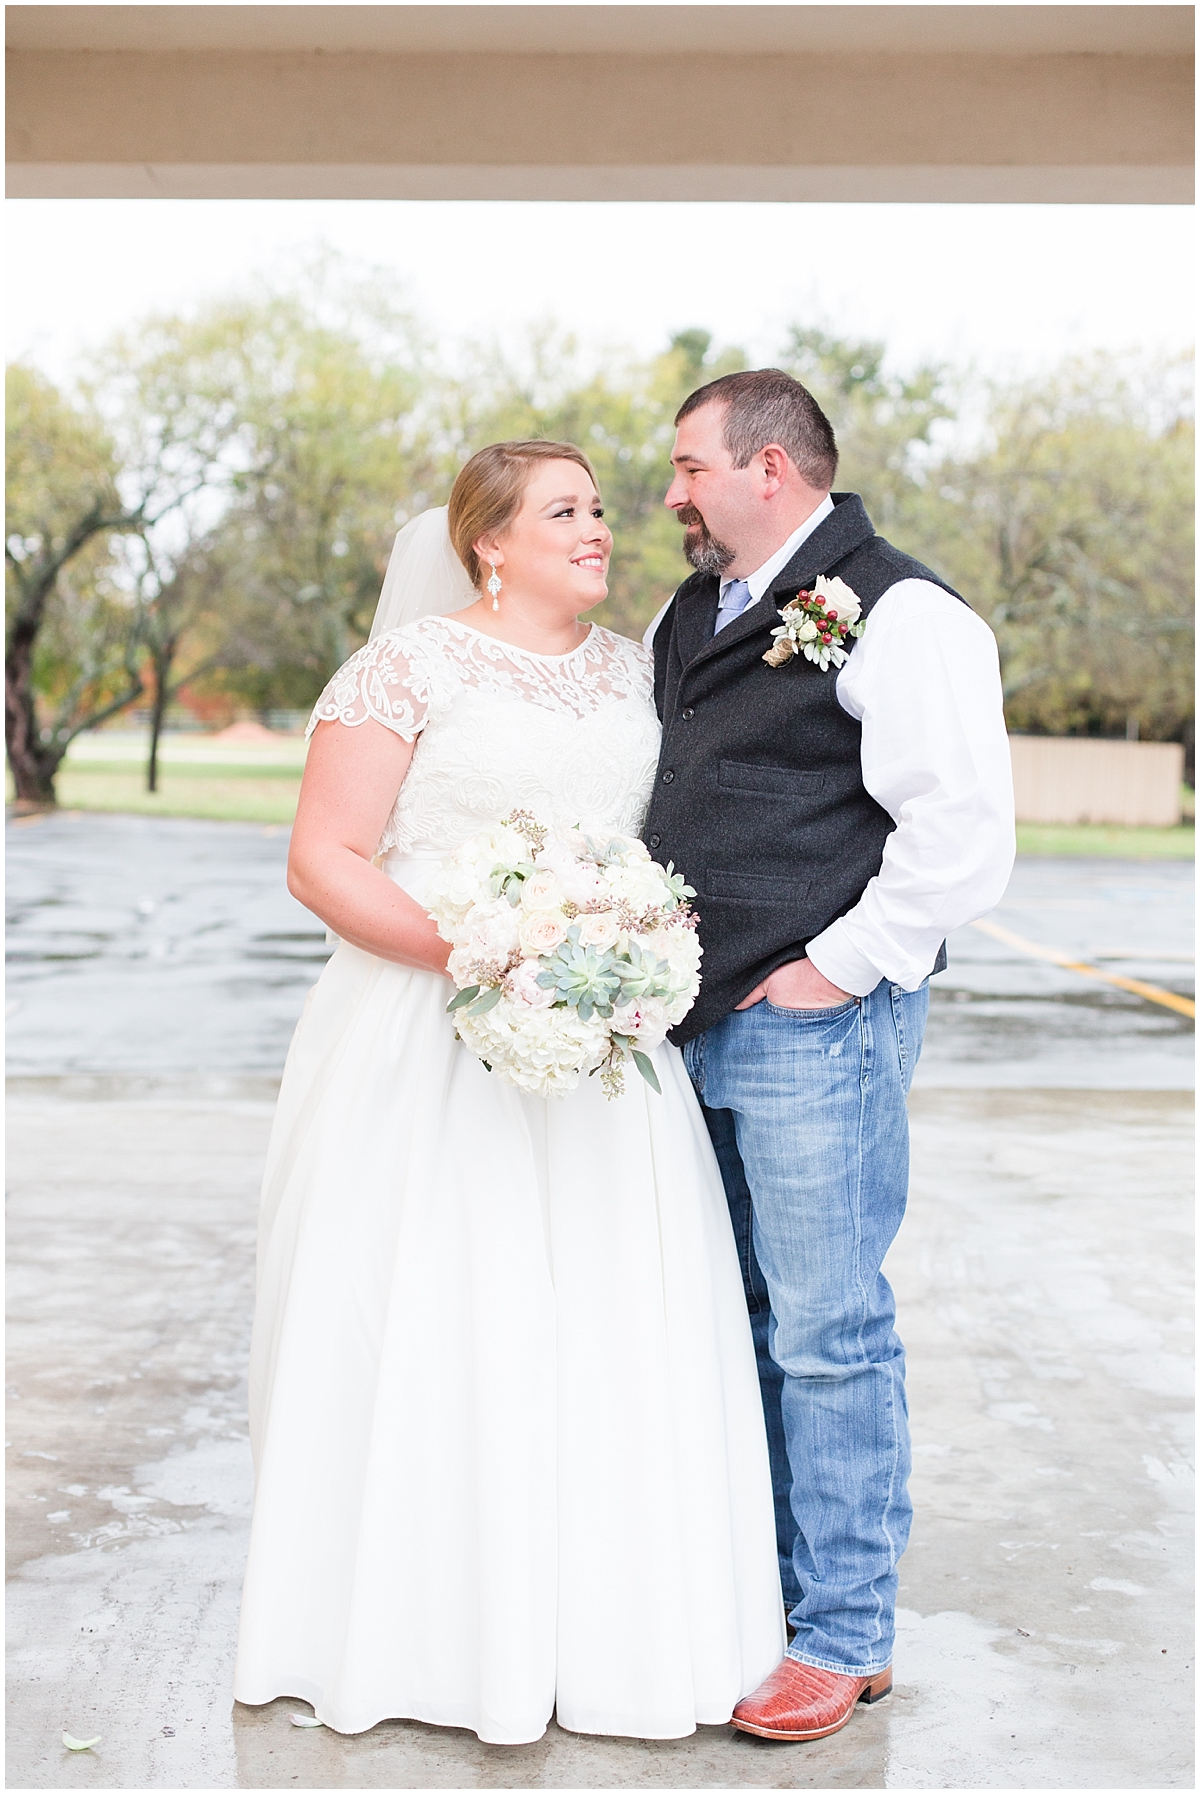 a-charcoal-grey-ivory-burgundy-winter-wedding-at-bethany-lutheran-church-in-fredericksburg-texas-by-allison-jeffers-wedding-photography-fredericksburg-wedding-photographer_0059